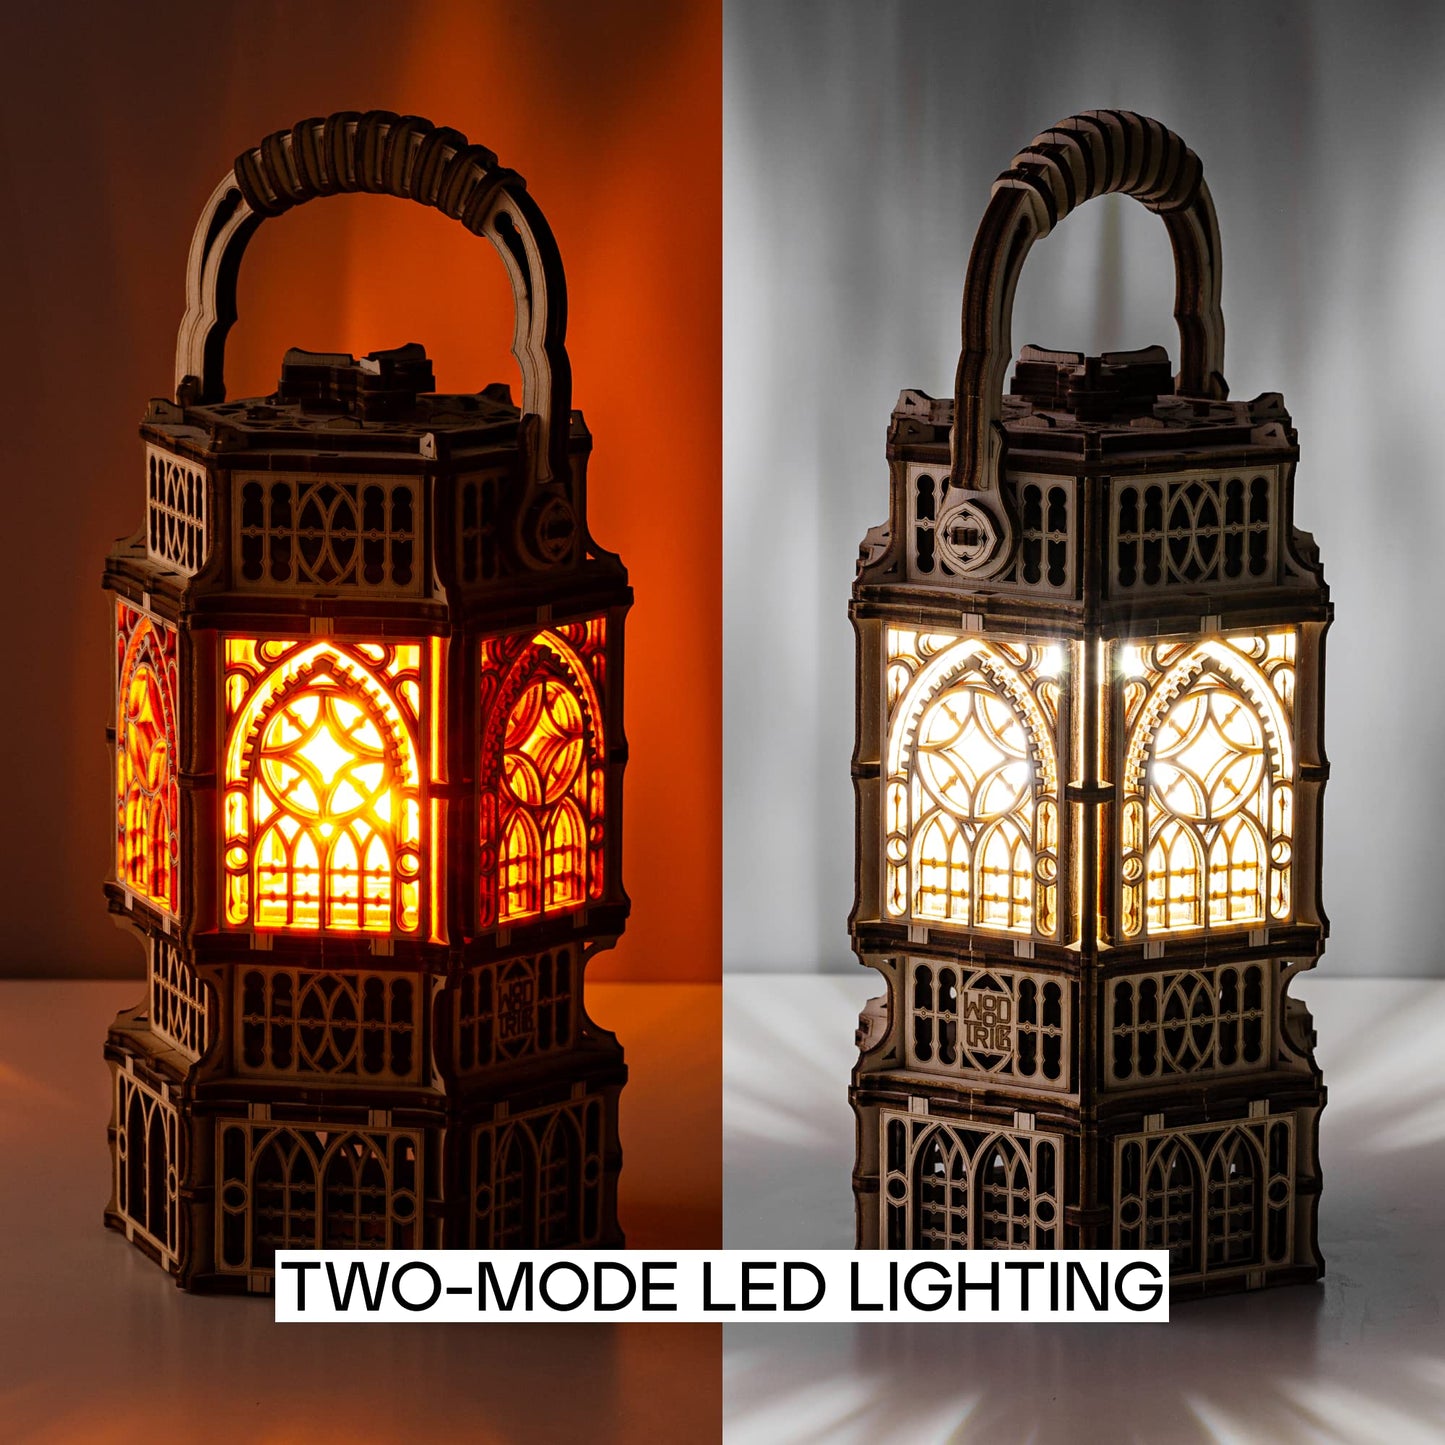 Wood Trick Antique Lantern Luminous LED 3D Wooden Puzzles for Adults and Kids to Build - 2-Mode Lighting - Engineering DIY Project Mechanical 3D Puzzle Model Kits for Adults